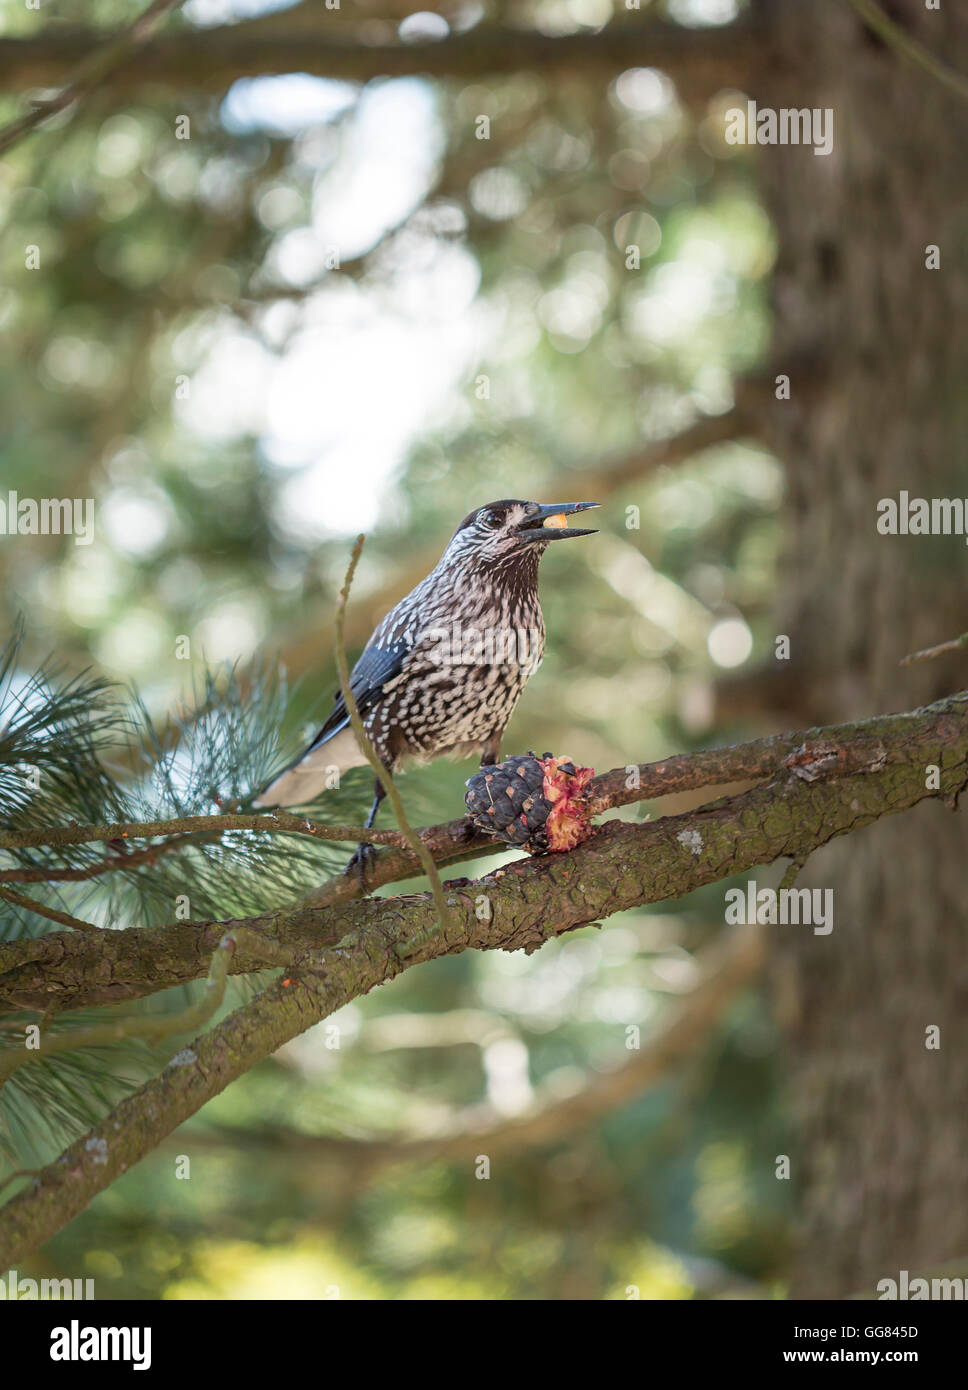 Spotted Nutcracker Eating Pinus Cembra Cone sitting on Branch. Stock Photo